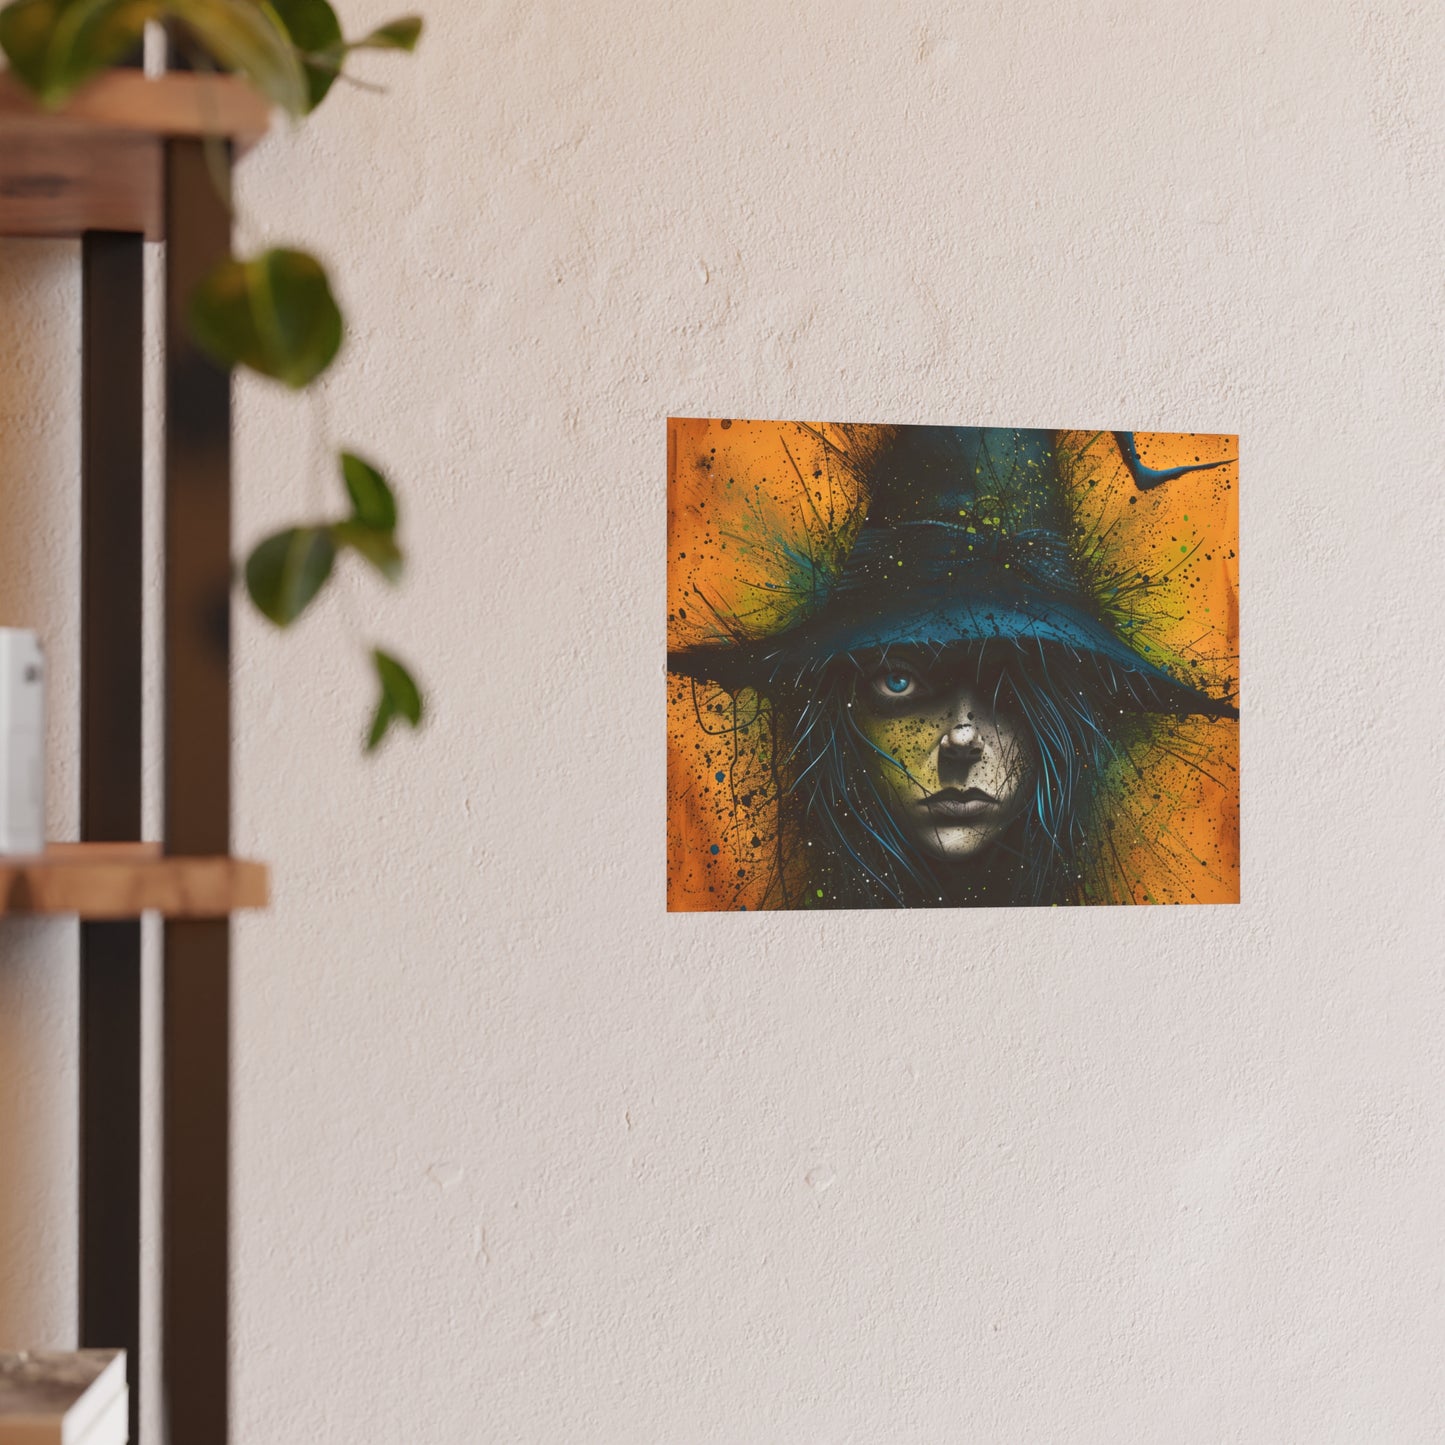 Satin and Archival Matte Posters: Wicked Witch